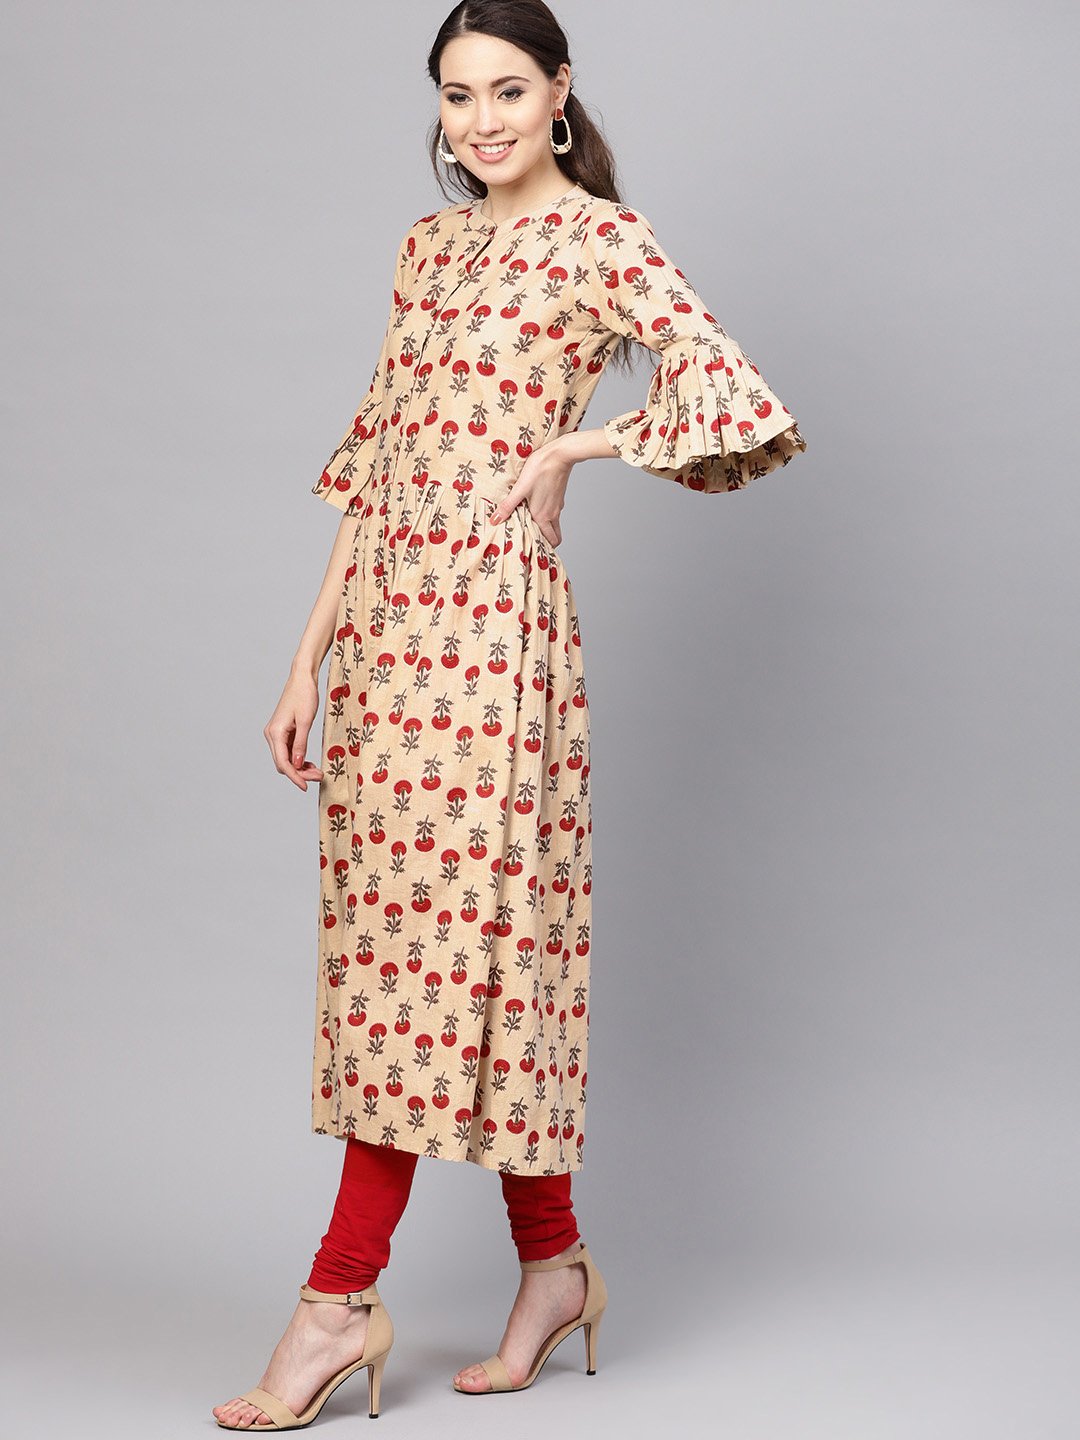 Women's Pink Cotton Printed Bell Sleeves Round Neck Casual Kurta Only - Myshka